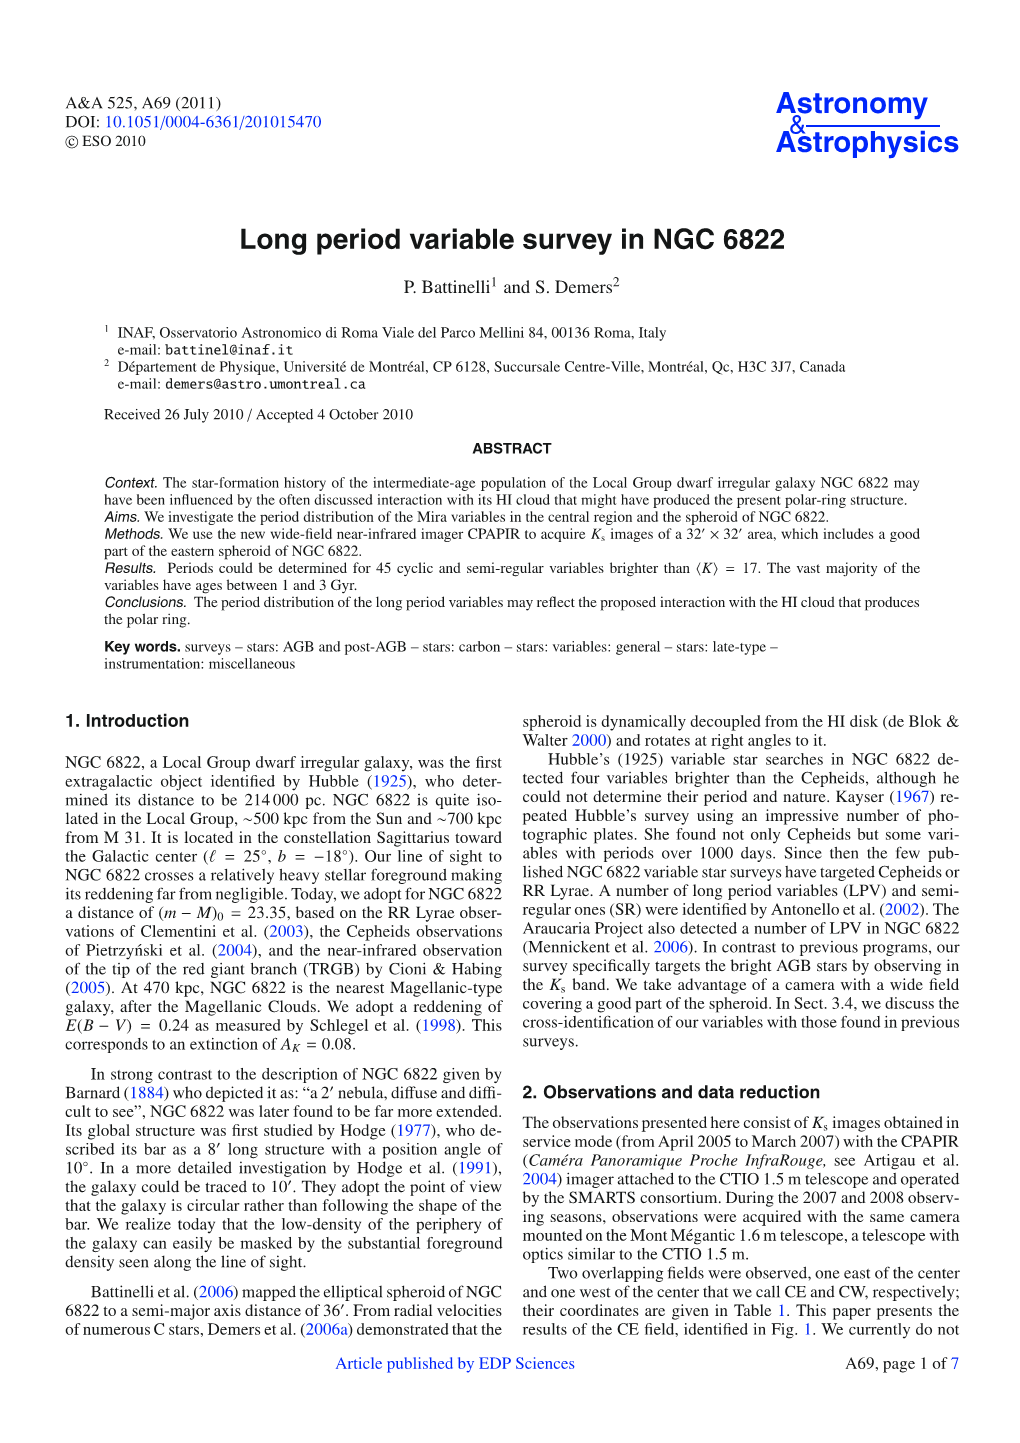 Long Period Variable Survey in NGC 6822